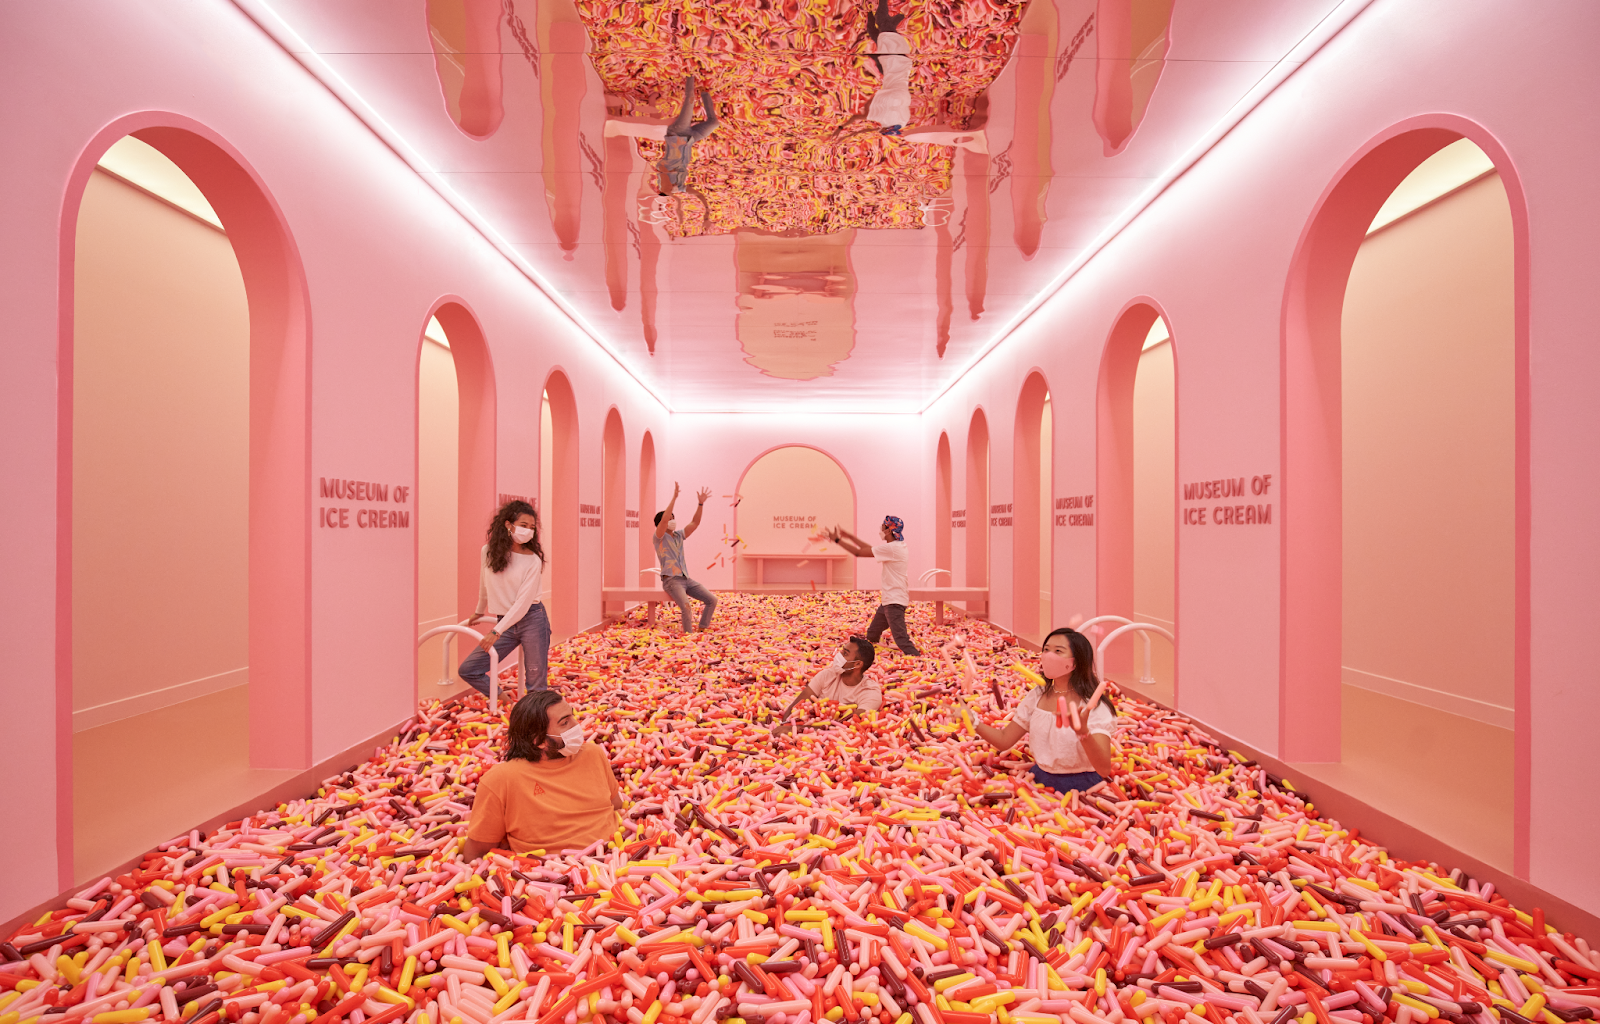 Museum of Ice Cream opens its doors at 100 Loewan Road in Dempsey and welcomes guests to Singapore’s latest lifestyle destination - Alvinology